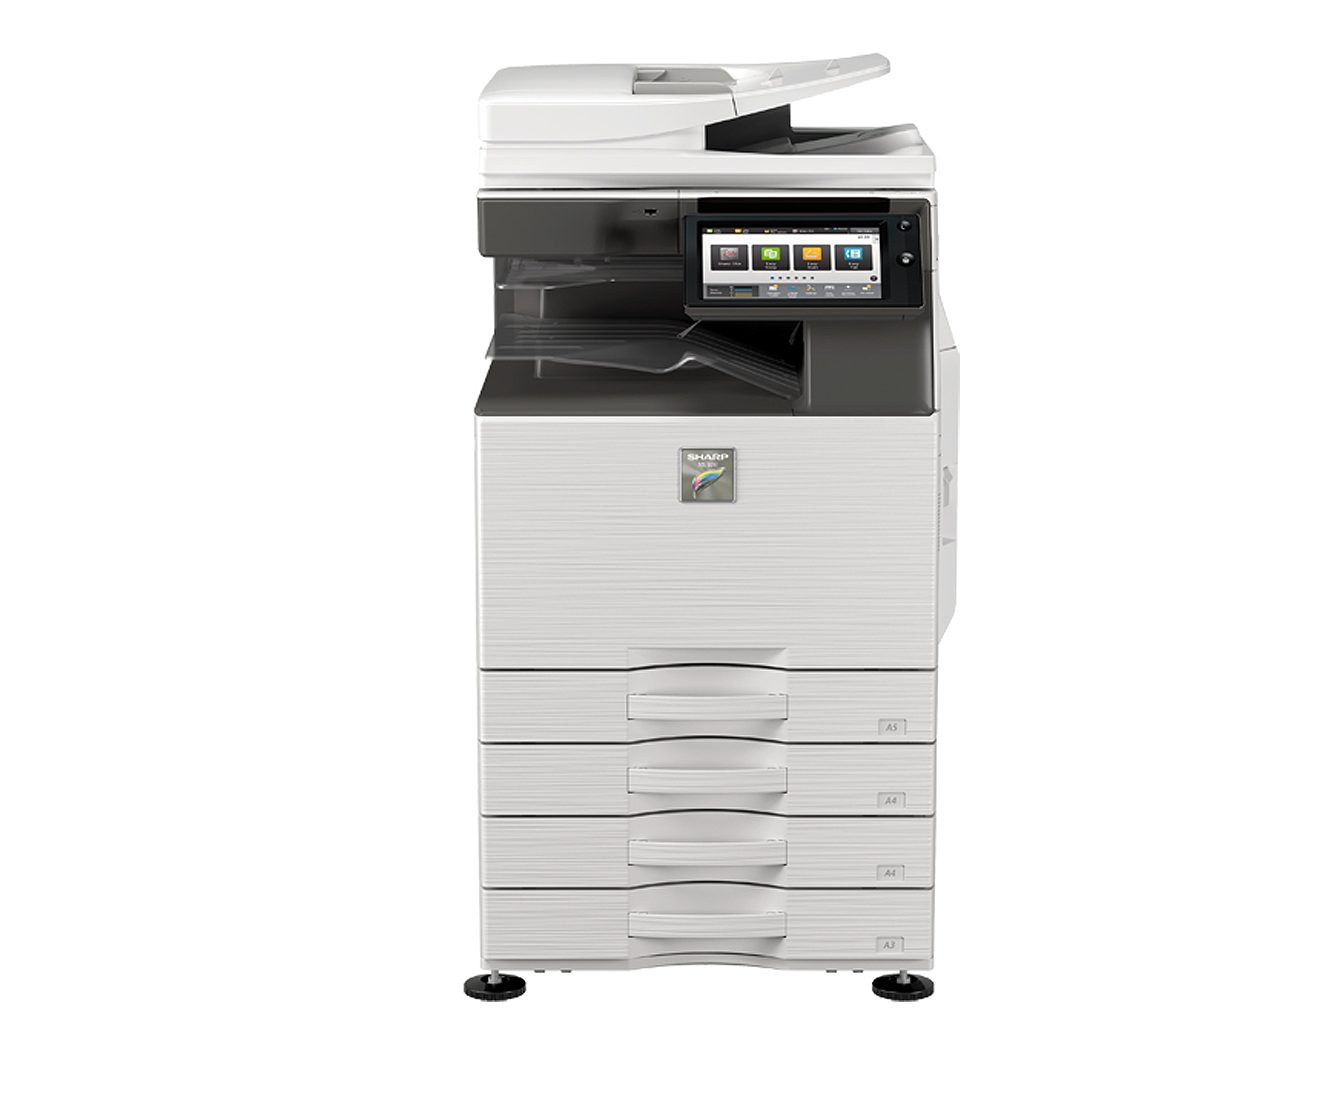 Sharp MX-3571 Color Digital Multifunctional Printer (Print, Copy, Scan, Fax, File) With Touchscreen Display And Mobile Supports